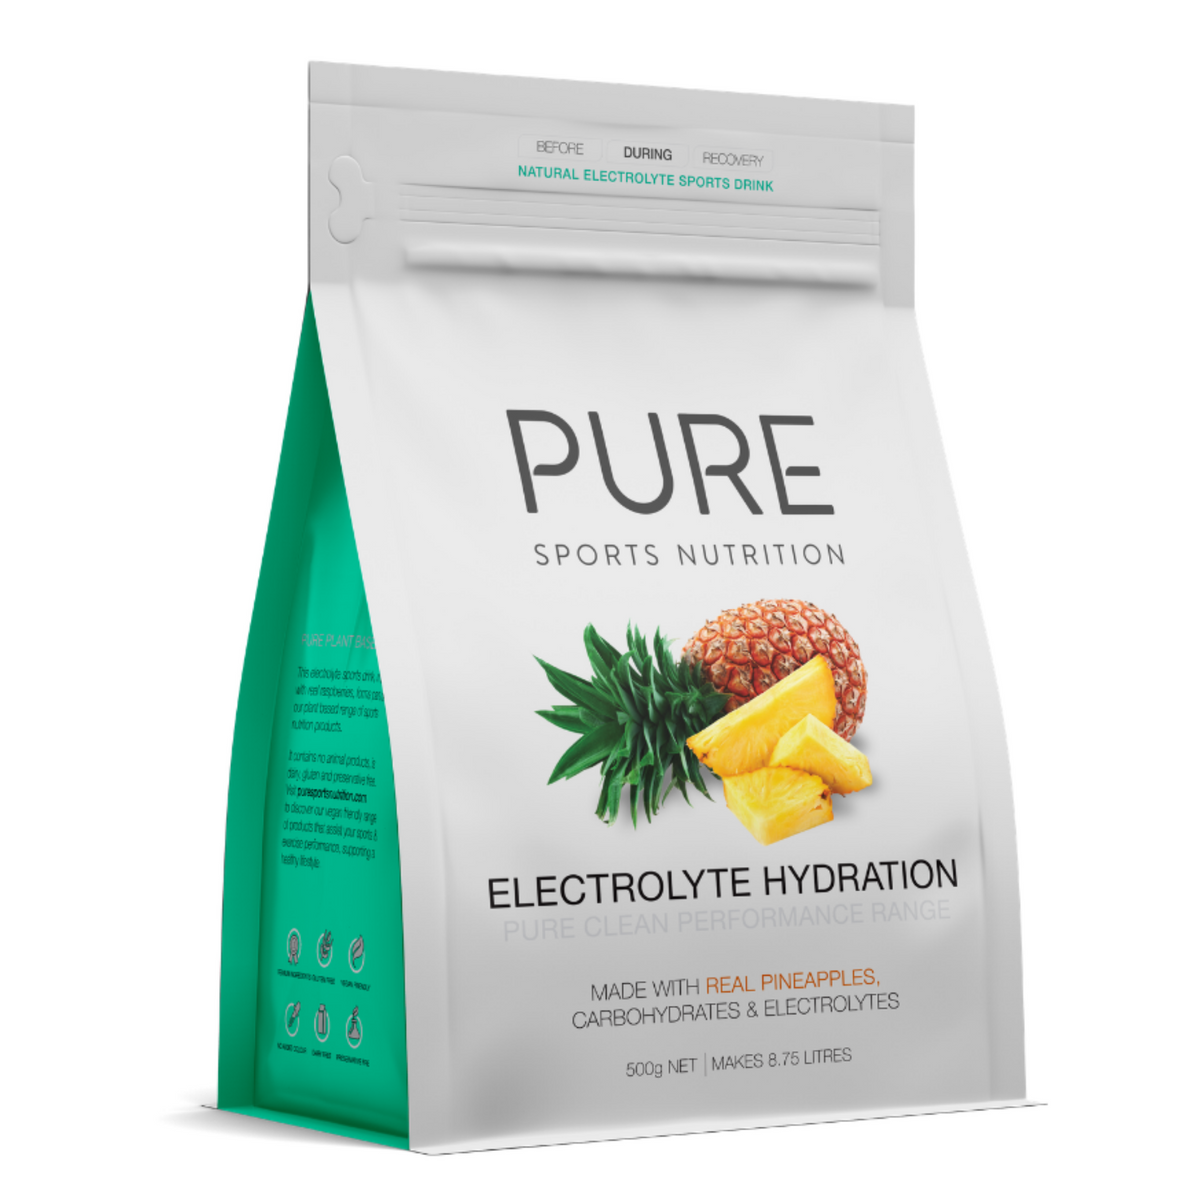 PURE Sports Nutrition Pineapple Electrolyte Hydration drink mix